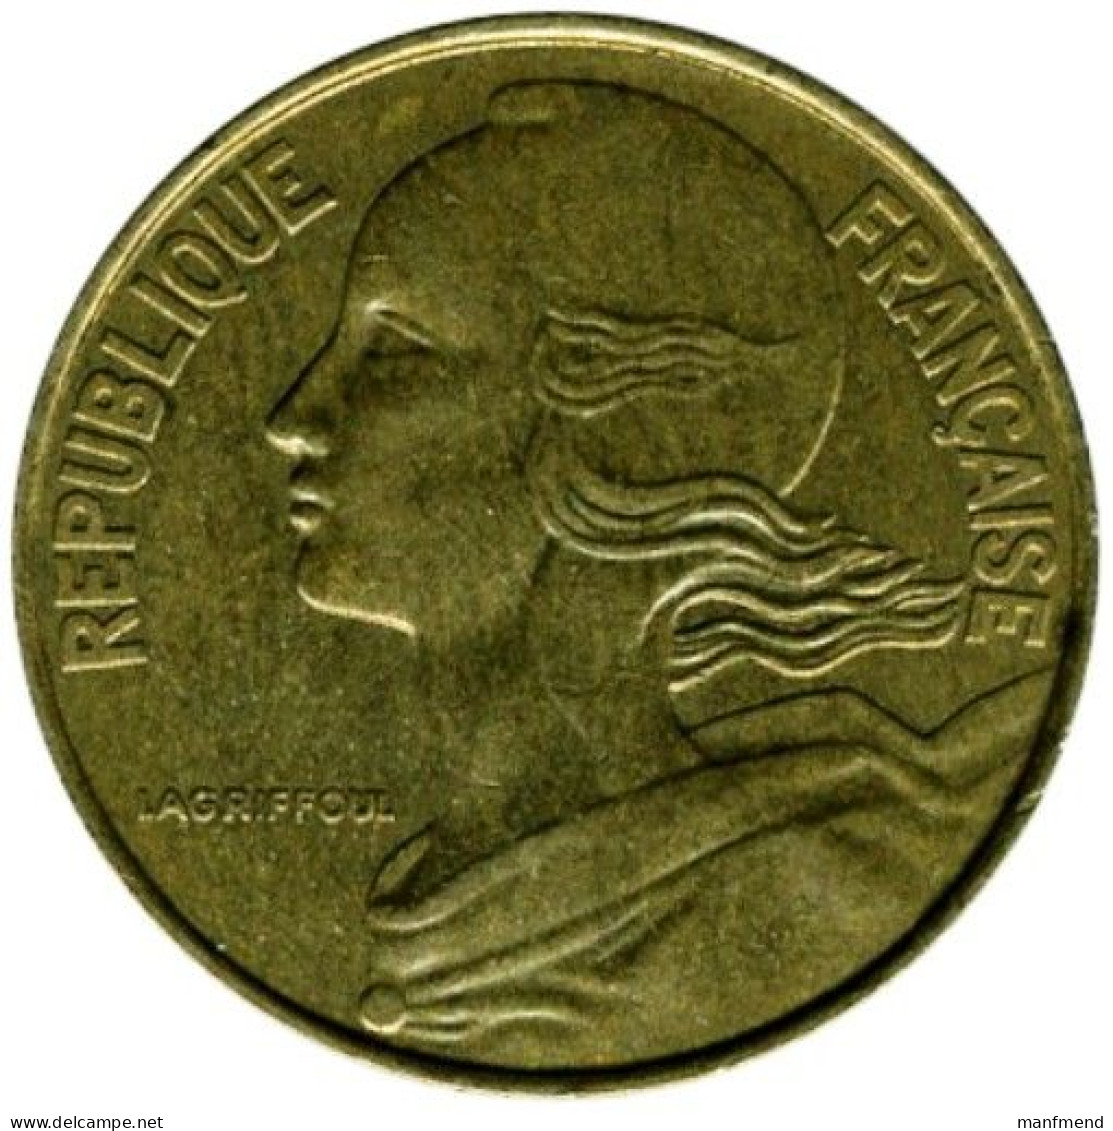 France - 1989 - KM 930 - 20 Centimes - XF - 20 Centimes